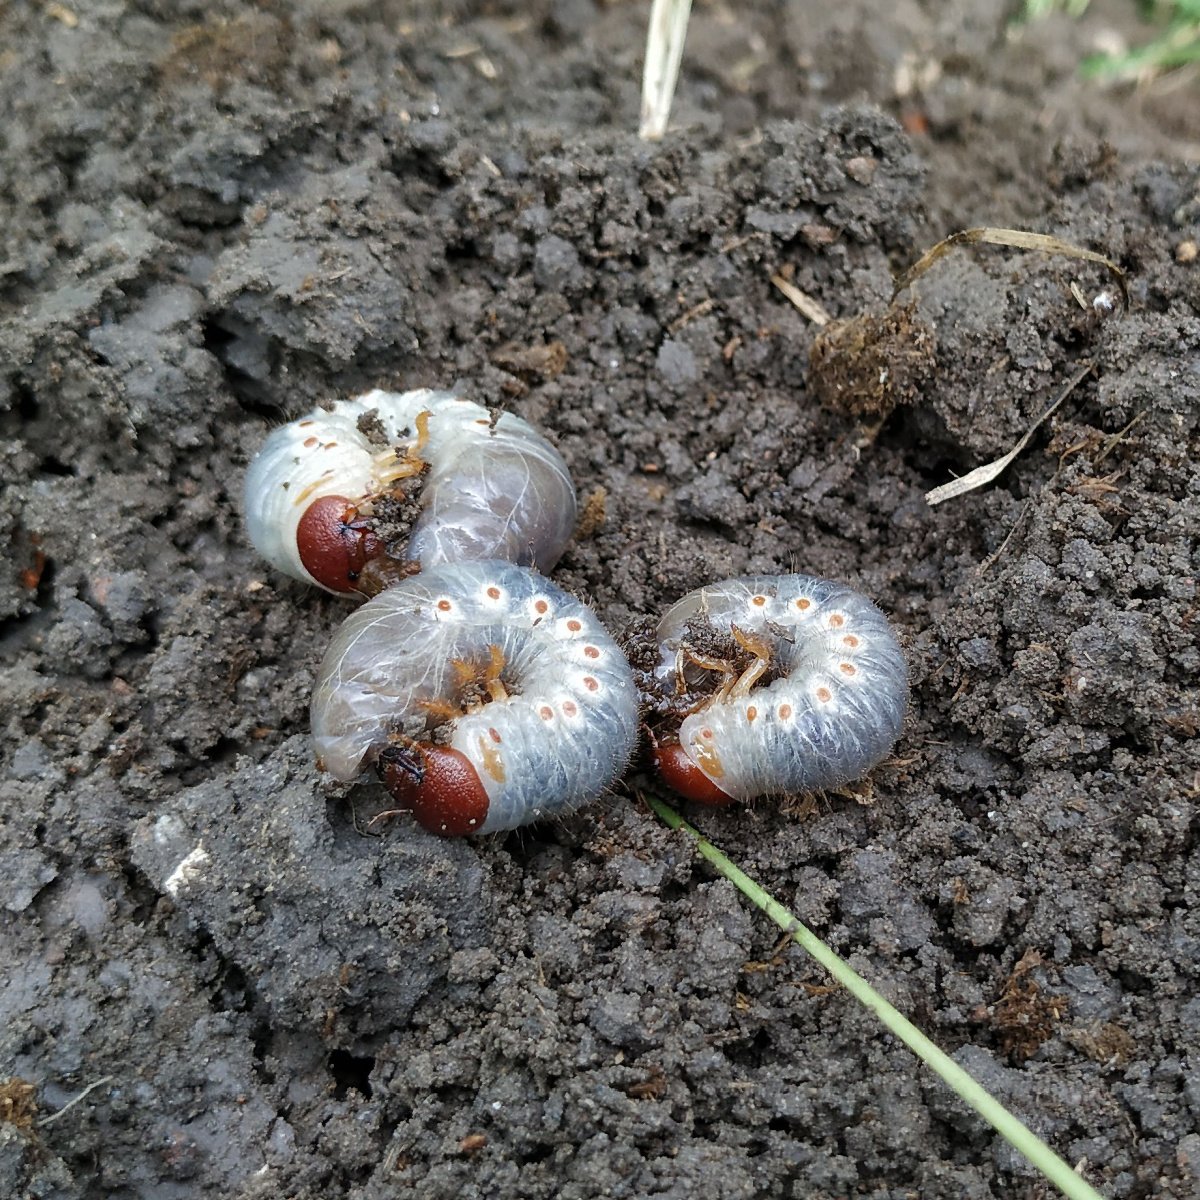 How To Get Rid Of Grubs - Keep Moles Away & Your Lawn Safe!